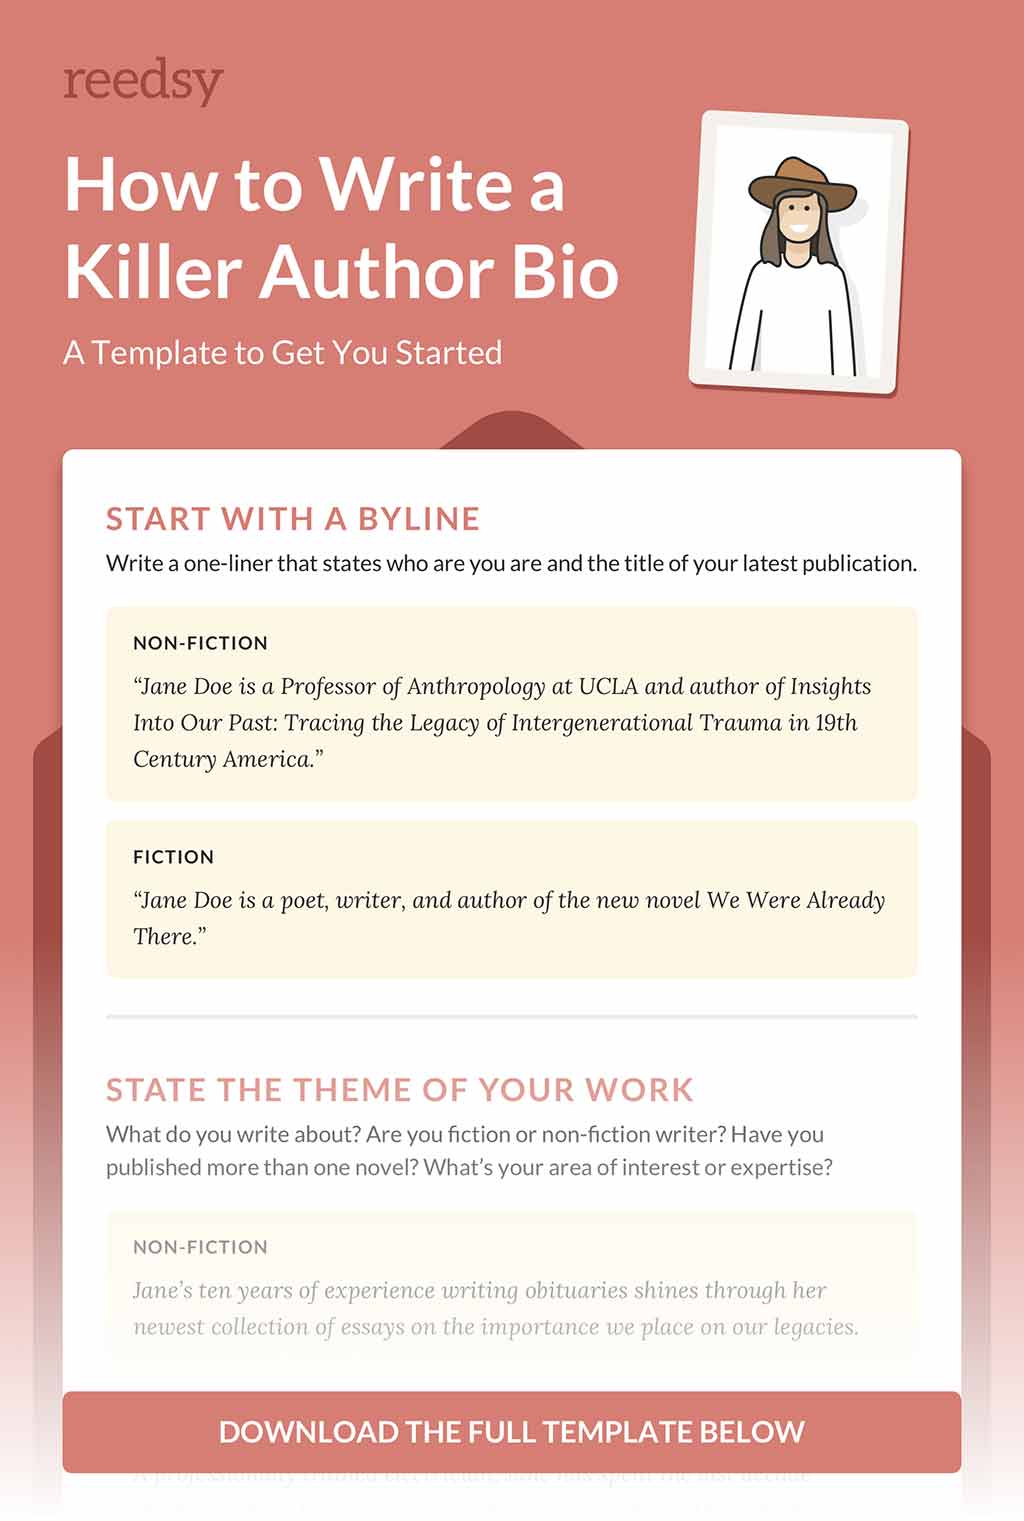 How to Write a Memorable Author Bio (with Template)